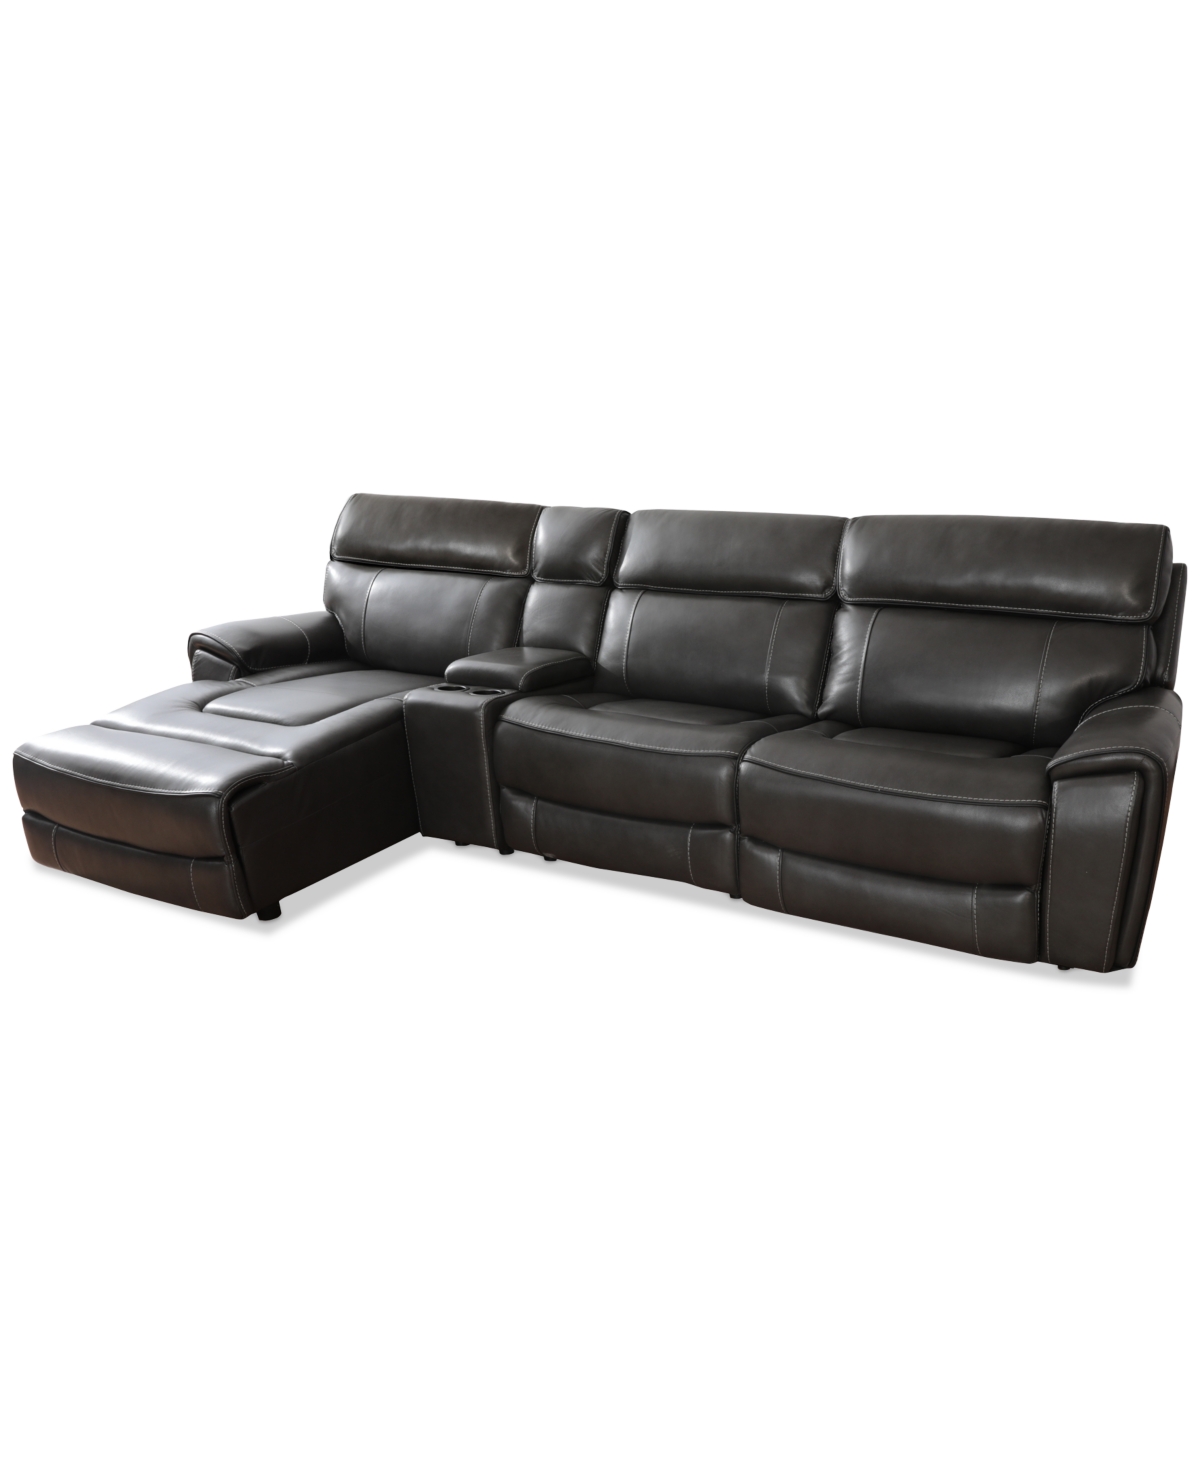 Macy's Hutchenson 127.5" 4-pc. Zero Gravity Leather Sectional With 2 Power Recliners, Chaise And Console, C In Coffee